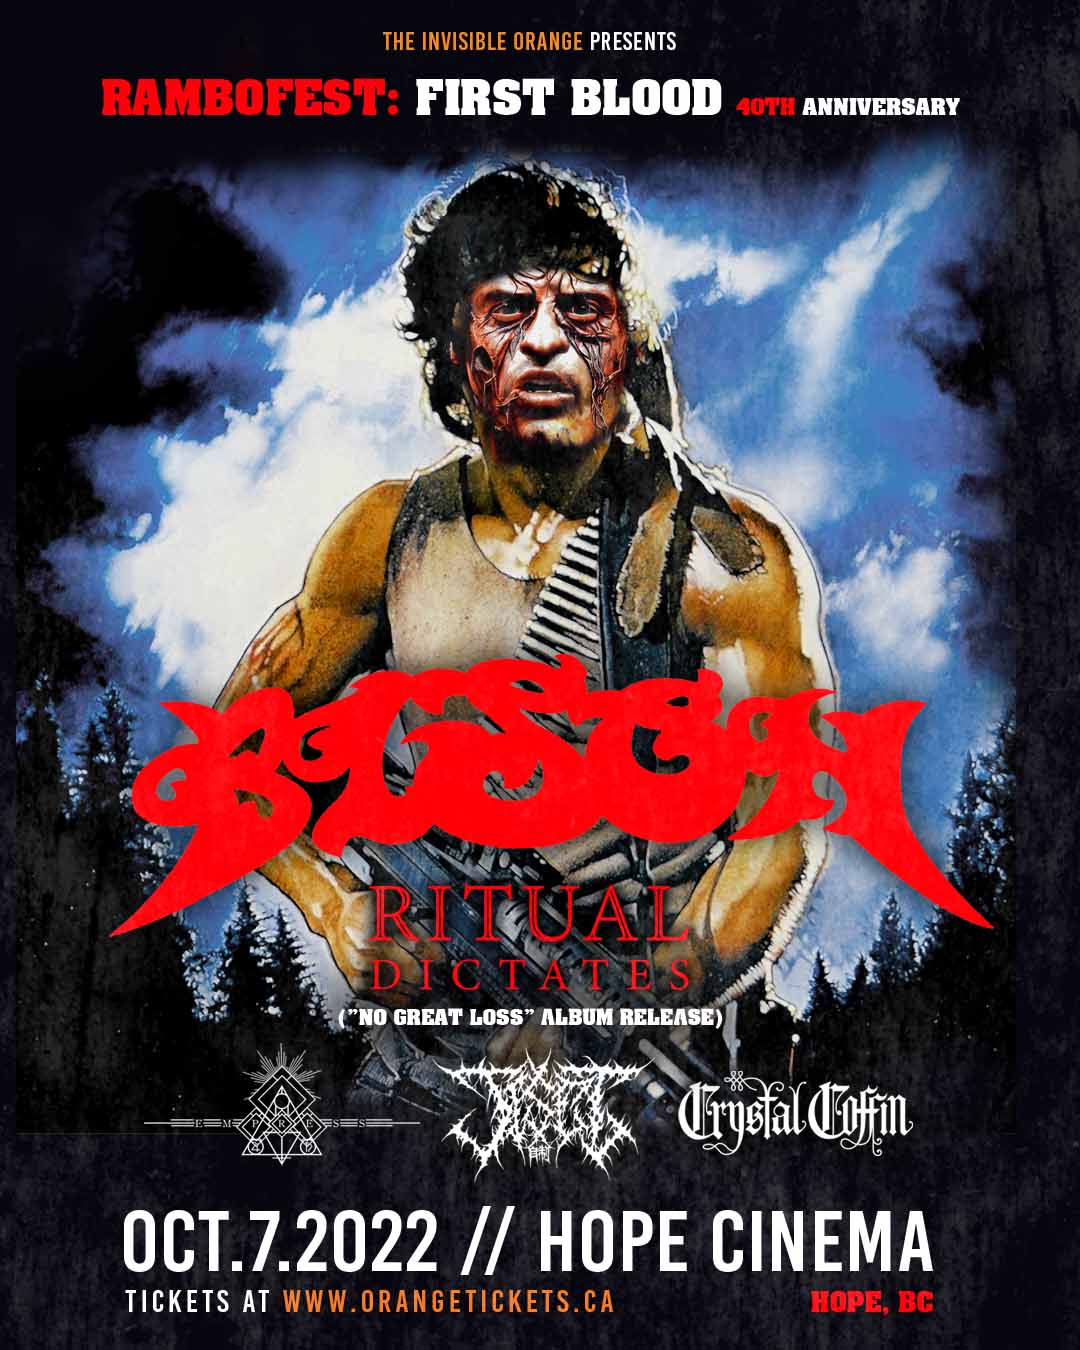 Rambo First Blood 40th Anniversary Show with BISON, RITUAL DICTATES (album release) and more